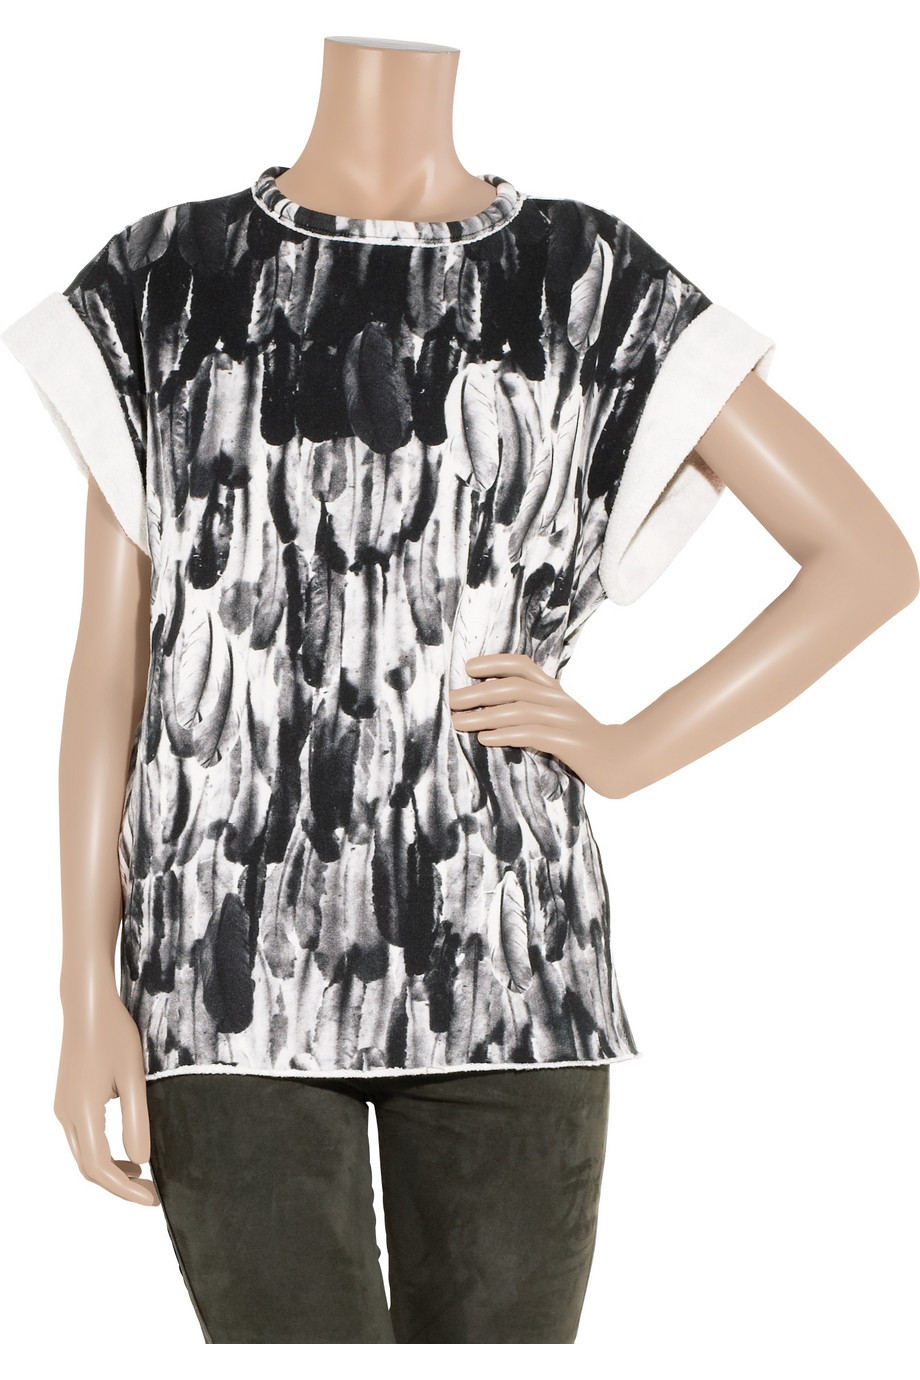 Lyst - Isabel Marant Feather-print Cotton Top in Black